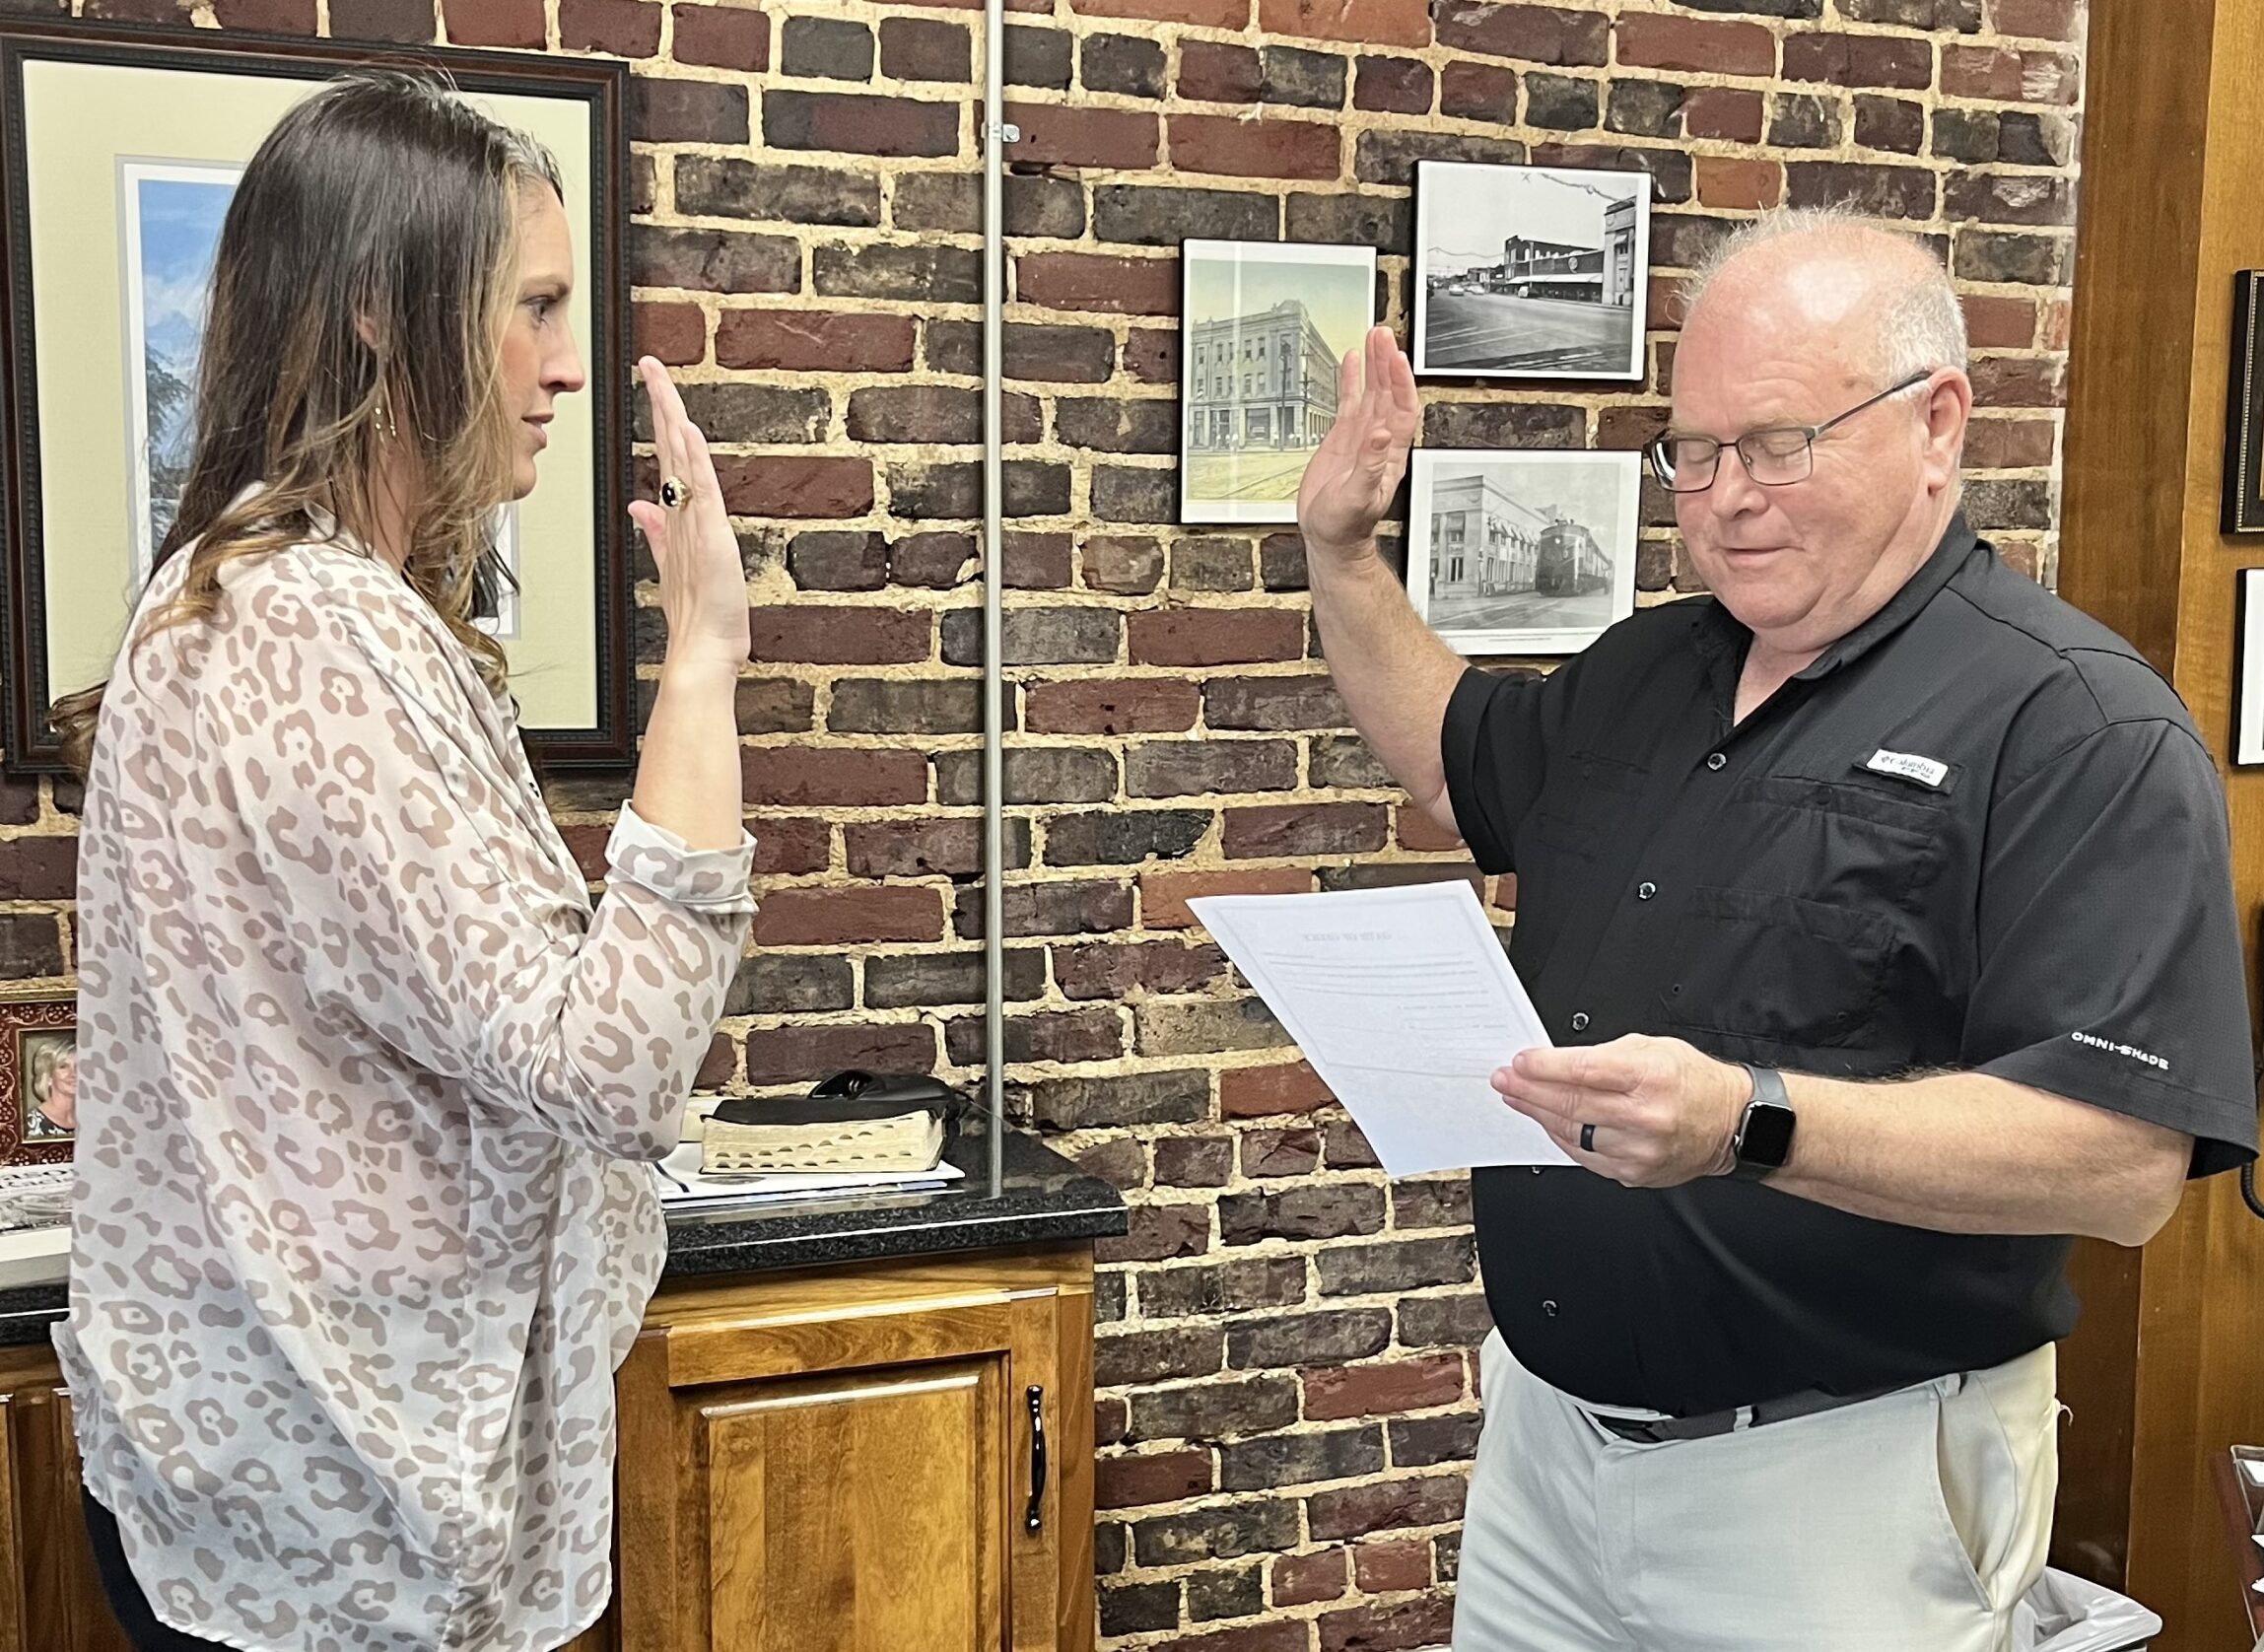 Mayor Tim Kent, right, administers the Oath to incoming School Board Member Lauren Bailey at City Hall on April 4, 2022.